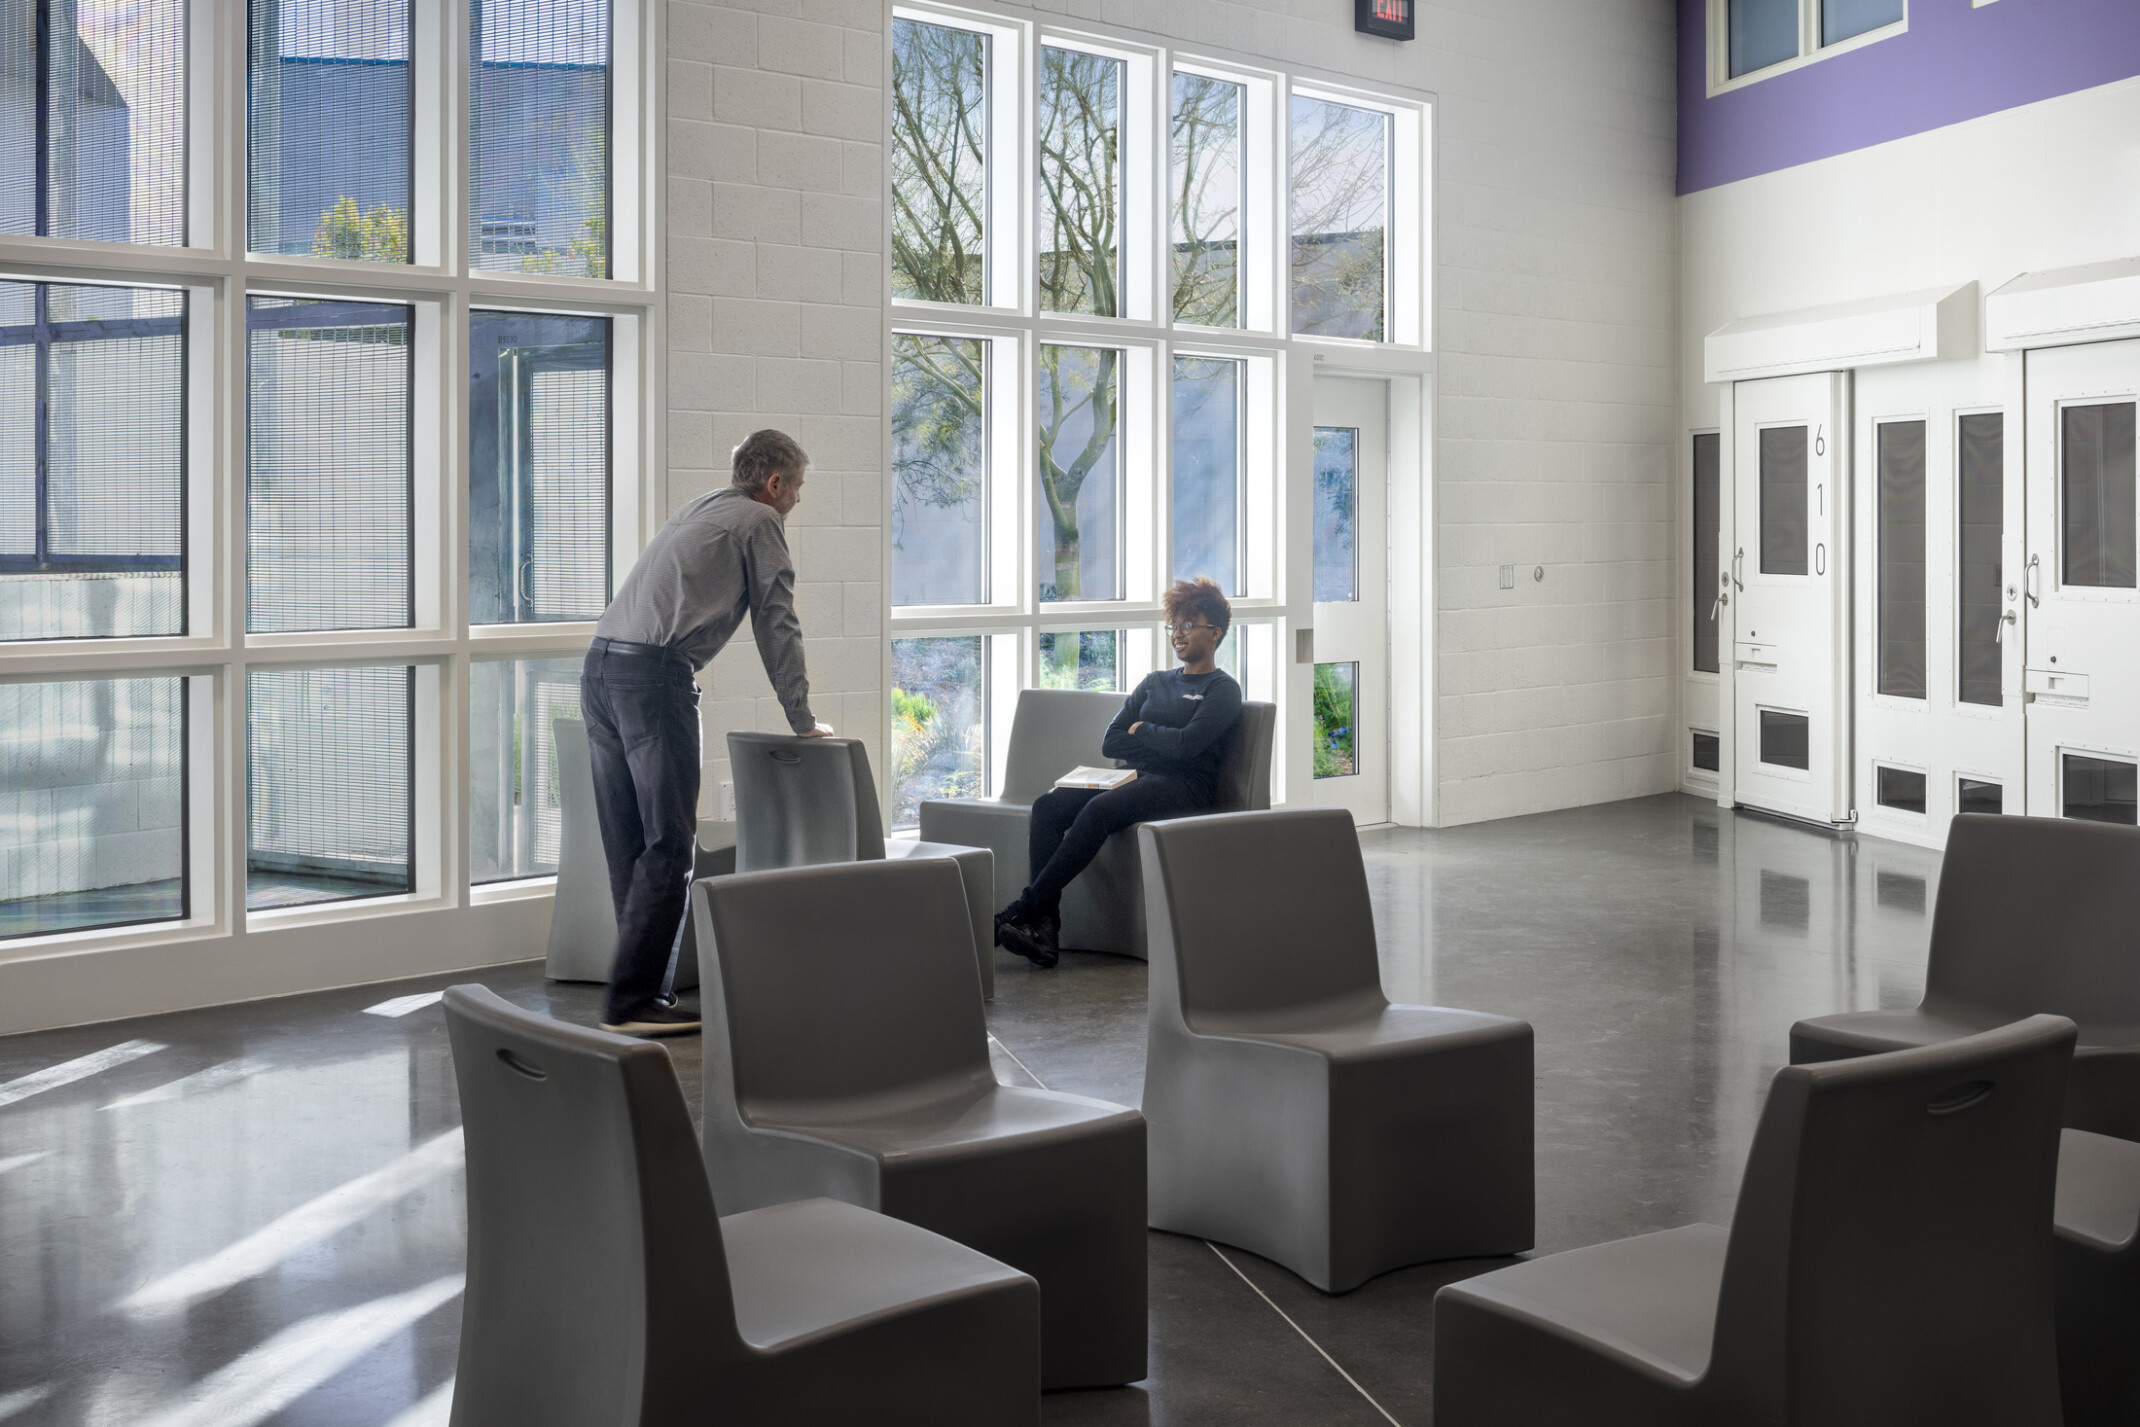 An interior photo of two people talking inside a communal area of the building, double-height windows, purple accent wall